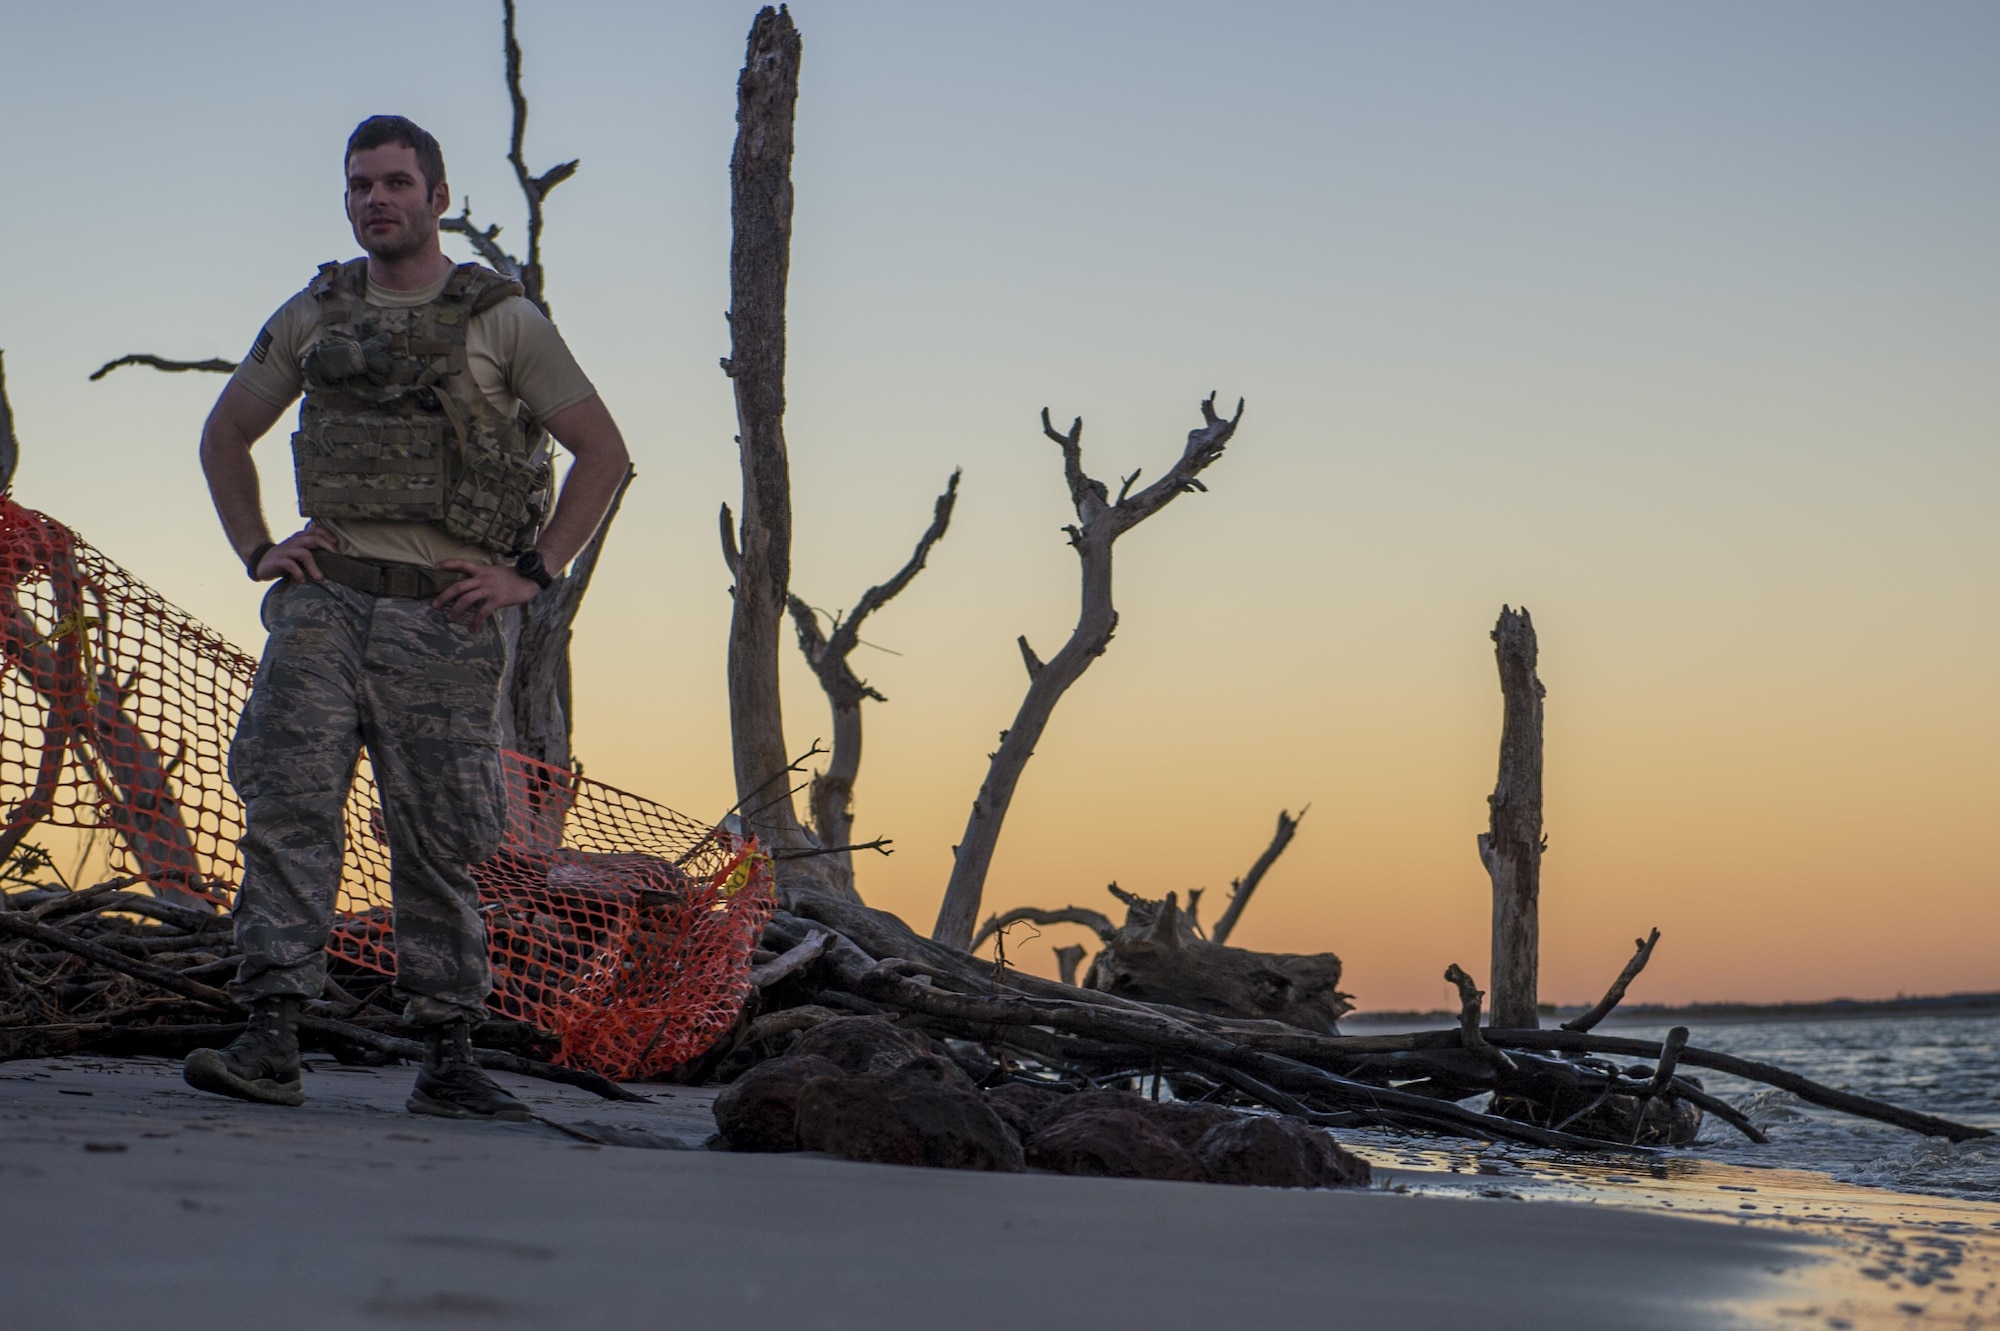 U.S. Air Force Senior Airman Michael Schuffer, an Explosive Ordnance Disposal technician with the 628th Civil Engineer squadron, work with local law enforcement bomb squad members to transport Civil War cannonballs washed ashore from  Hurricane Matthew to a safe location at Folly Beach, S.C., Oct. 9, 2016. After the discovery of ordnance on the beach, local law enforcement and Air Force personnel worked together to properly dispose of the hazards. 